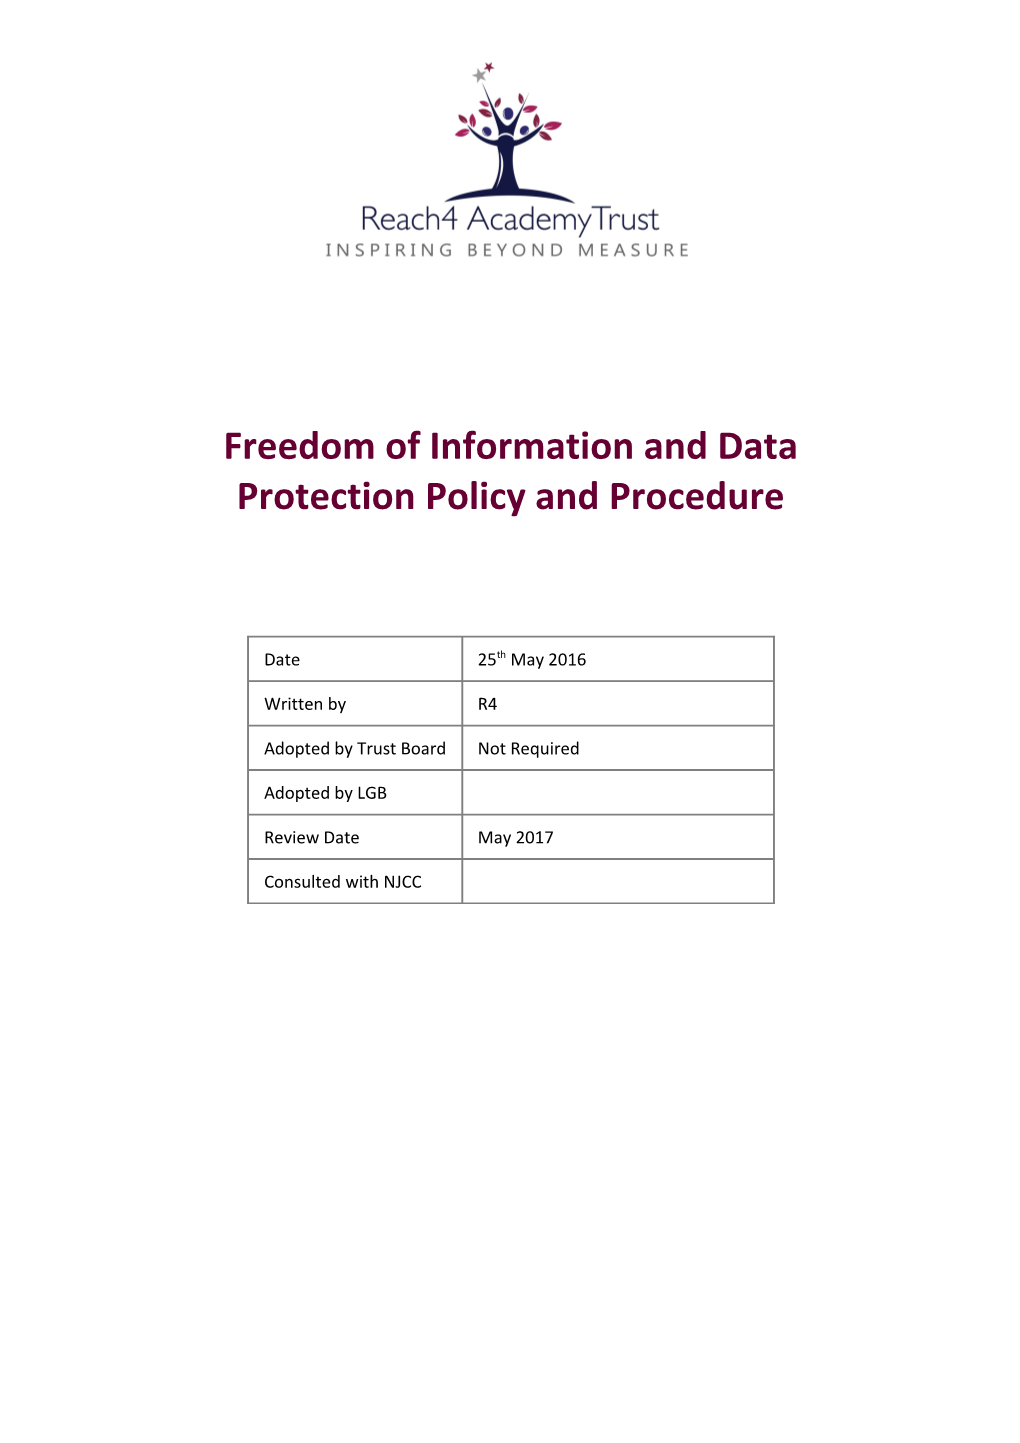 Freedom of Information and Data Protection Policy and Procedure